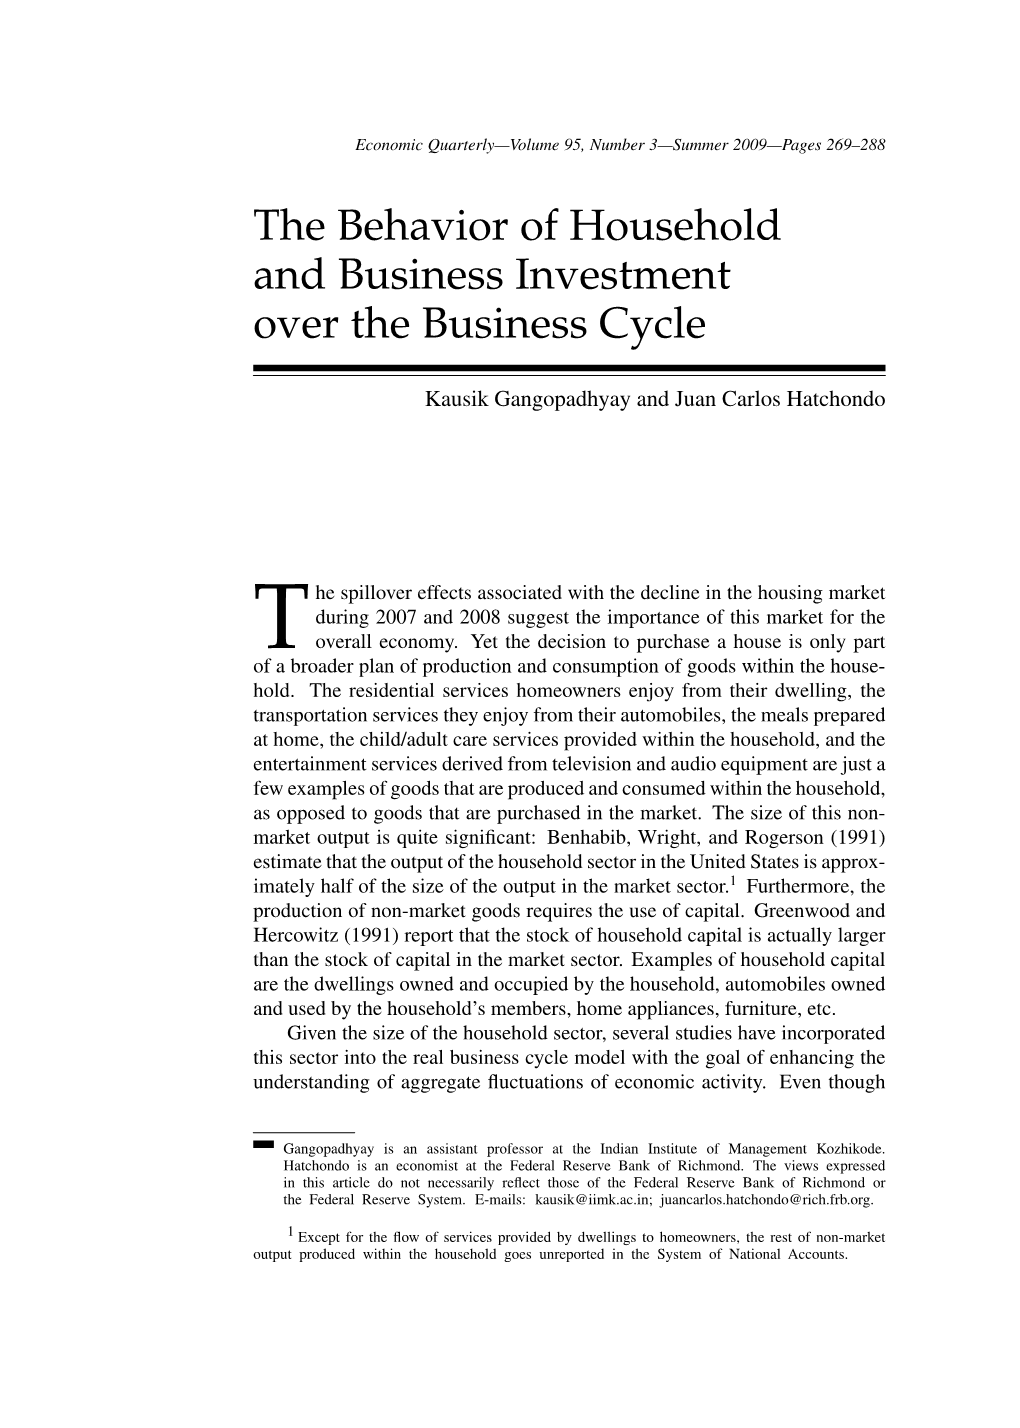 The Behavior of Household and Business Investment Over the Business Cycle